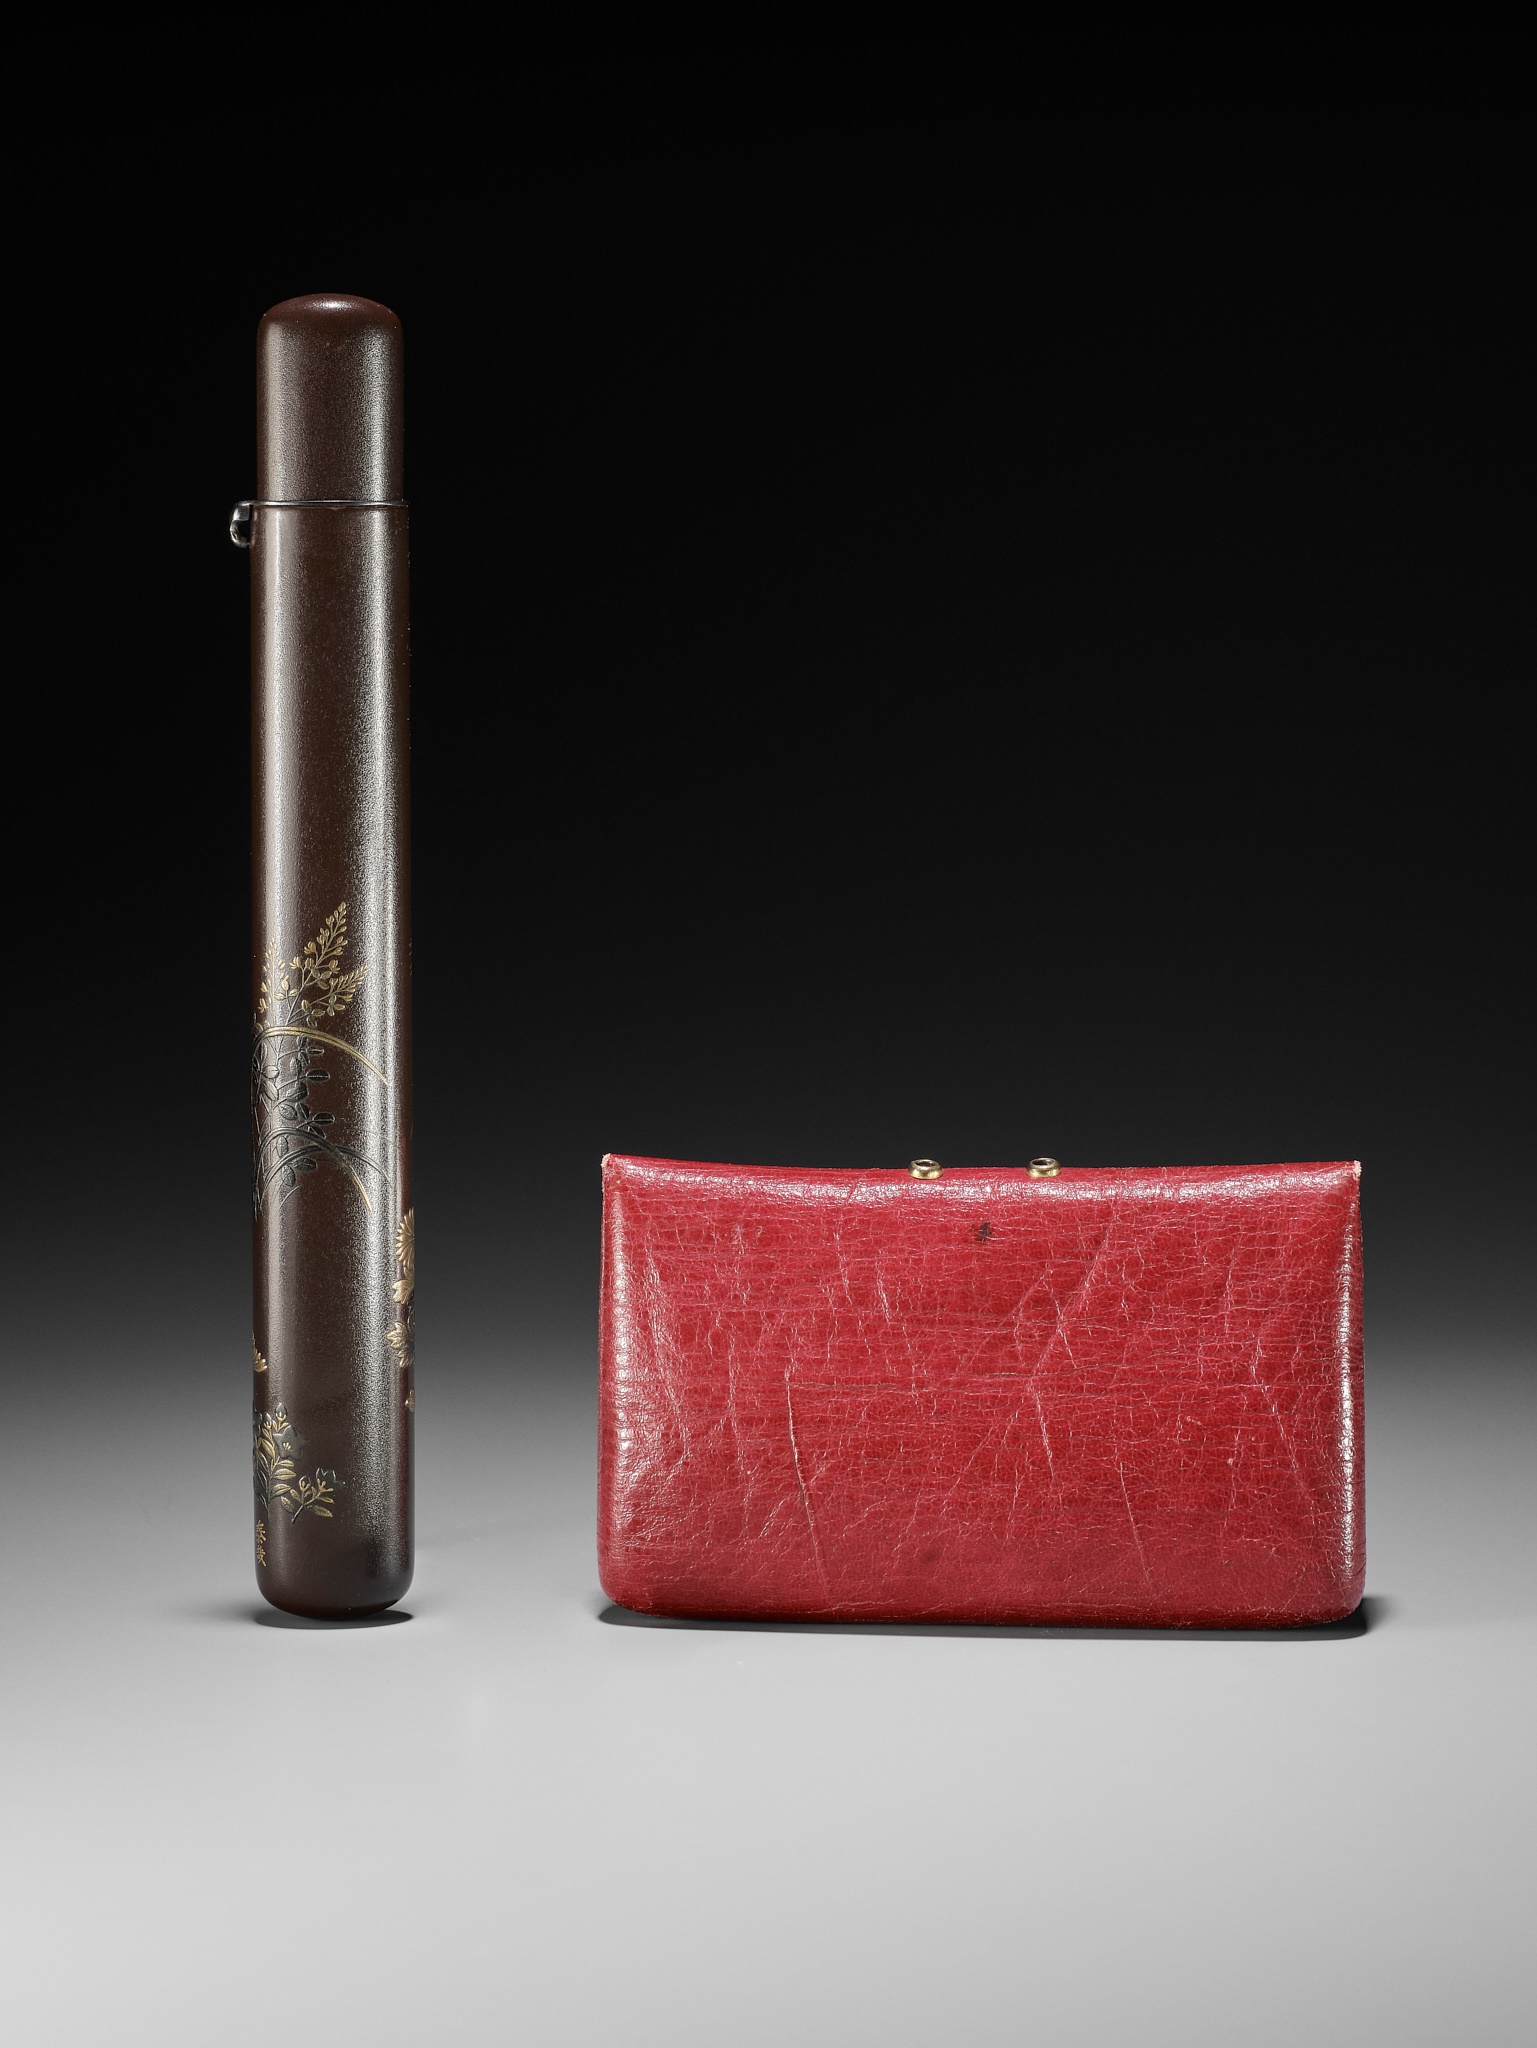 A LACQUER KISERUZUTSU AND A RED LEATHER POUCH DEPICTING AUTUMN GRASSES AND FLOWERS - Image 9 of 9